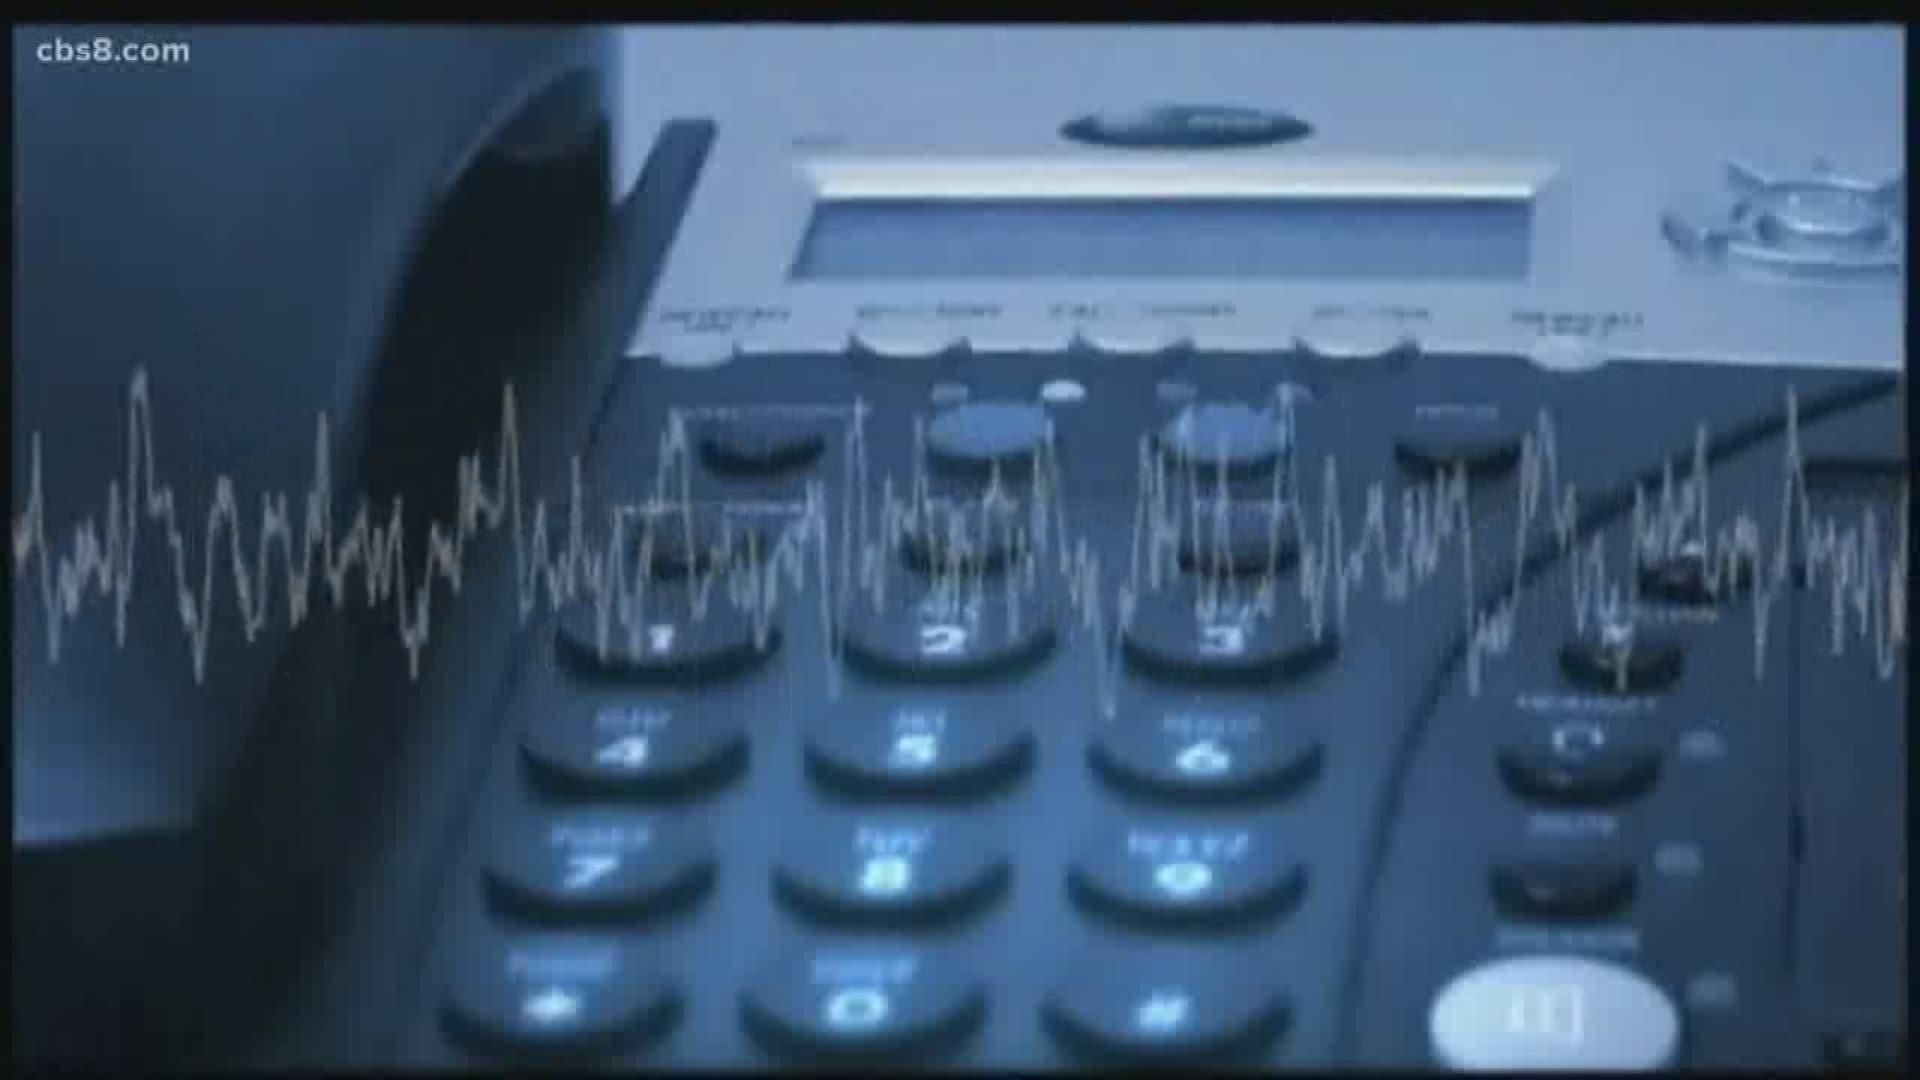 San Diego County residents are getting social security scam calls at an alarming rate.